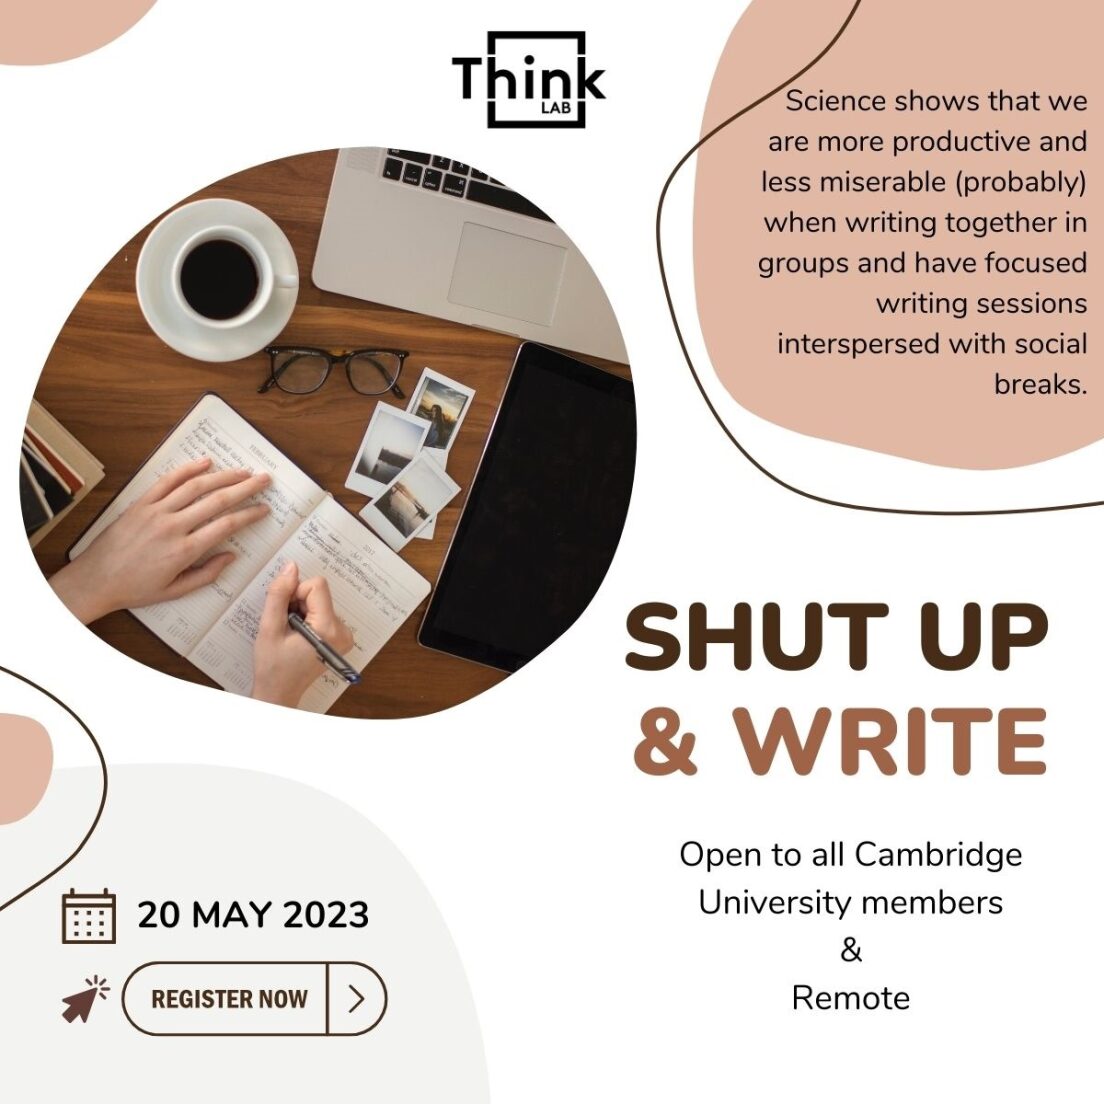 Do you need focused writing time for your project or work? Join us next Monday for the @ThinkLabCam Shut up and write! meetup. We'll be at @Kings_College and joined by @thomroulet, everyone is welcome to come, in-person and online: eventbrite.com/e/shut-up-writ… #cambridge #writing